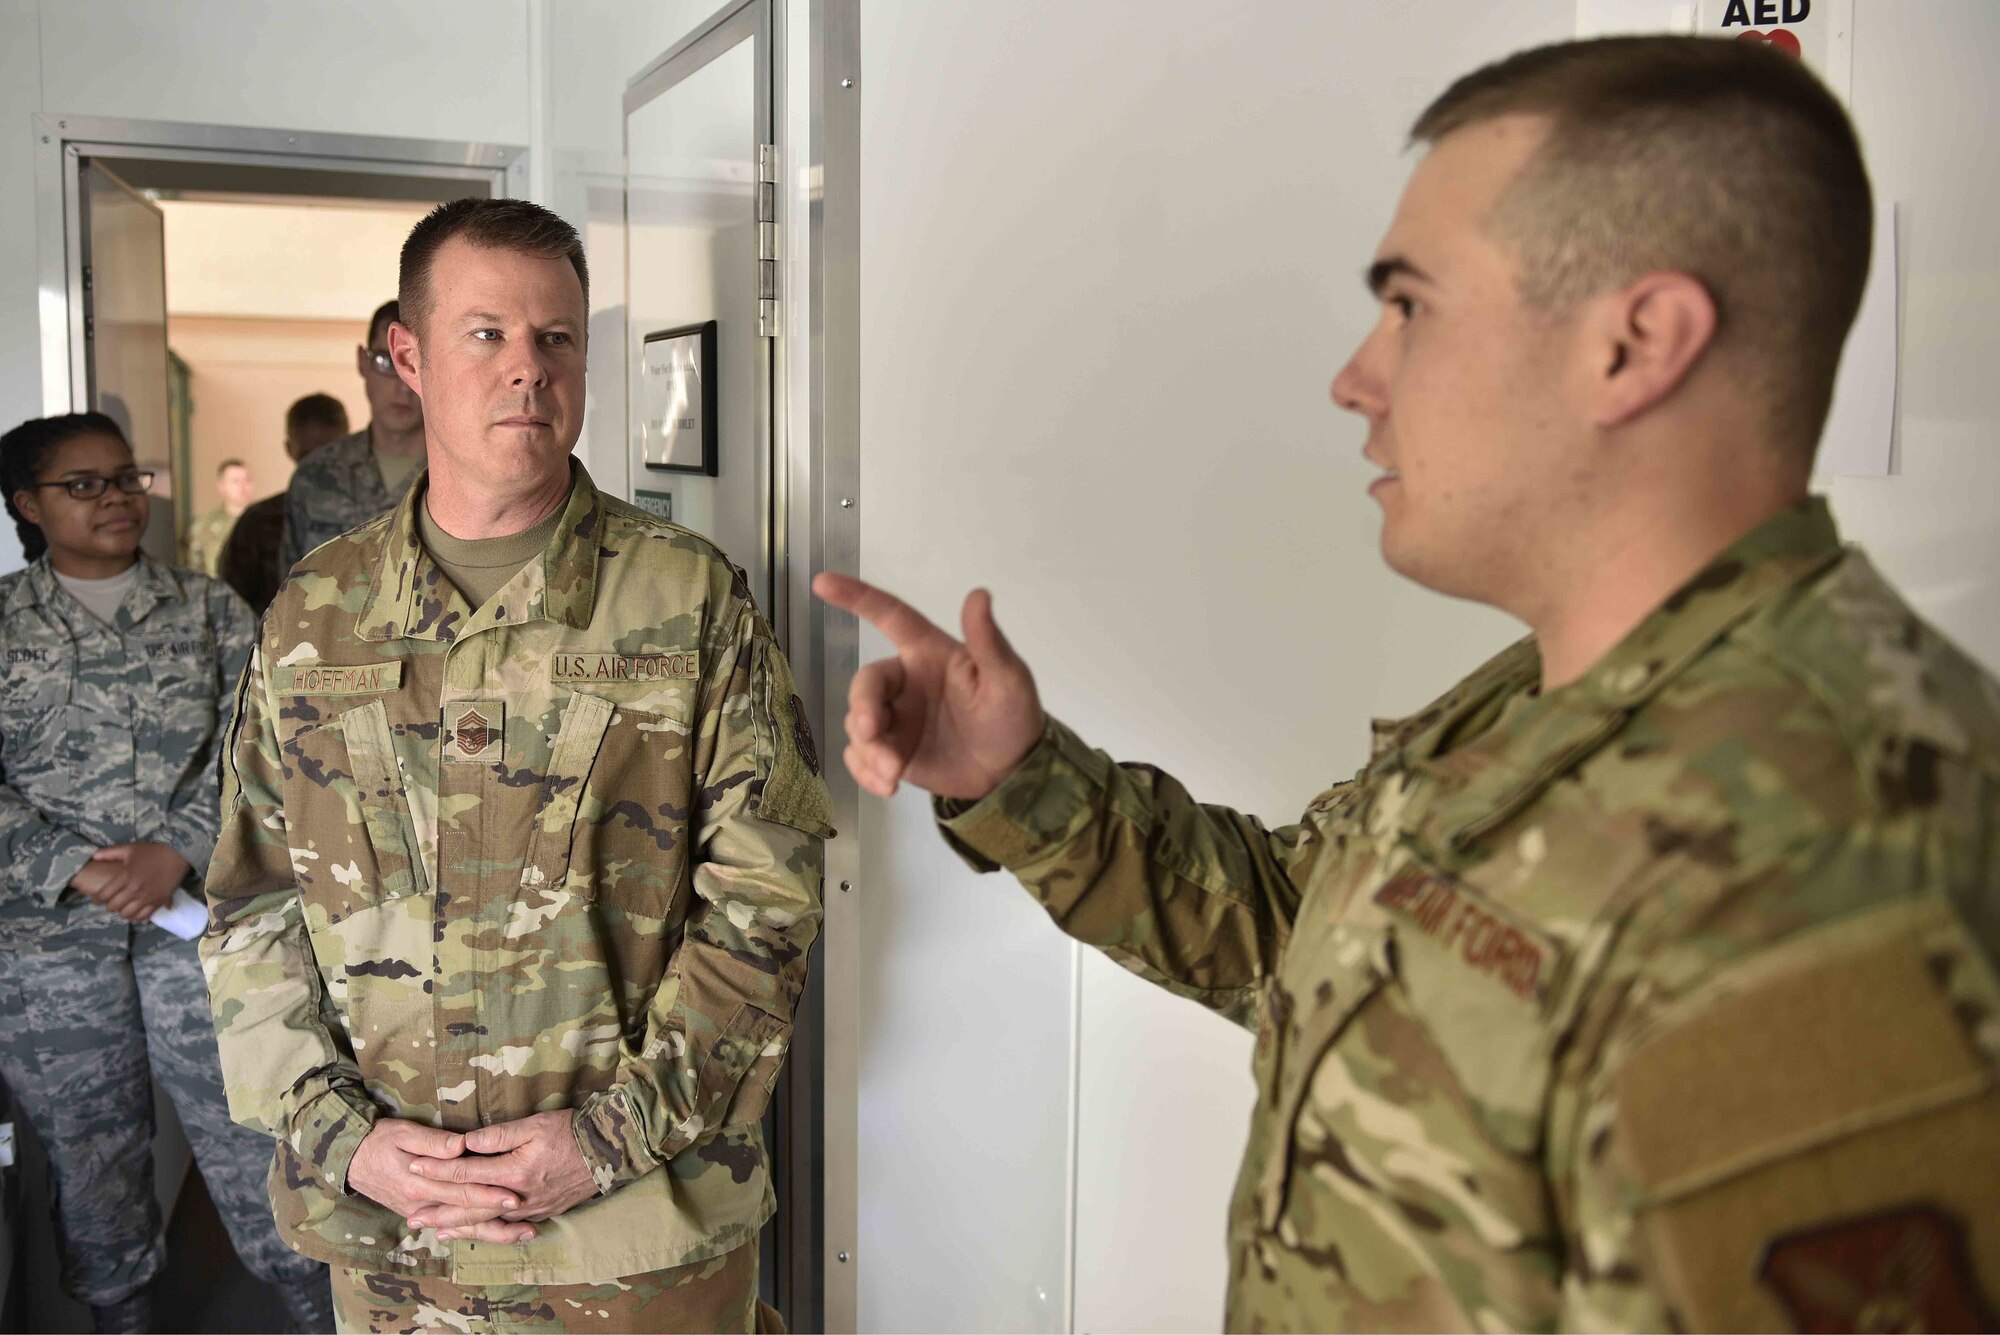 U.S. Air Force Chief Master Sgt. Charles Hoffman (left), Air Force Global Strike Command command chief, listens to Staff Sgt. Samuel Van Diest, non-commissioned officer in charge of medical logistics equipment, 377th Medical Support Squadron, talk about medical readiness at Kirtland Air Force Base, N.M., June 13, 2019. Hoffman visited with Airmen across the 377th Air Base Wing to learn more about them and their mission. (U.S. Air Force photo by Airman 1st Class Austin J. Prisbrey)